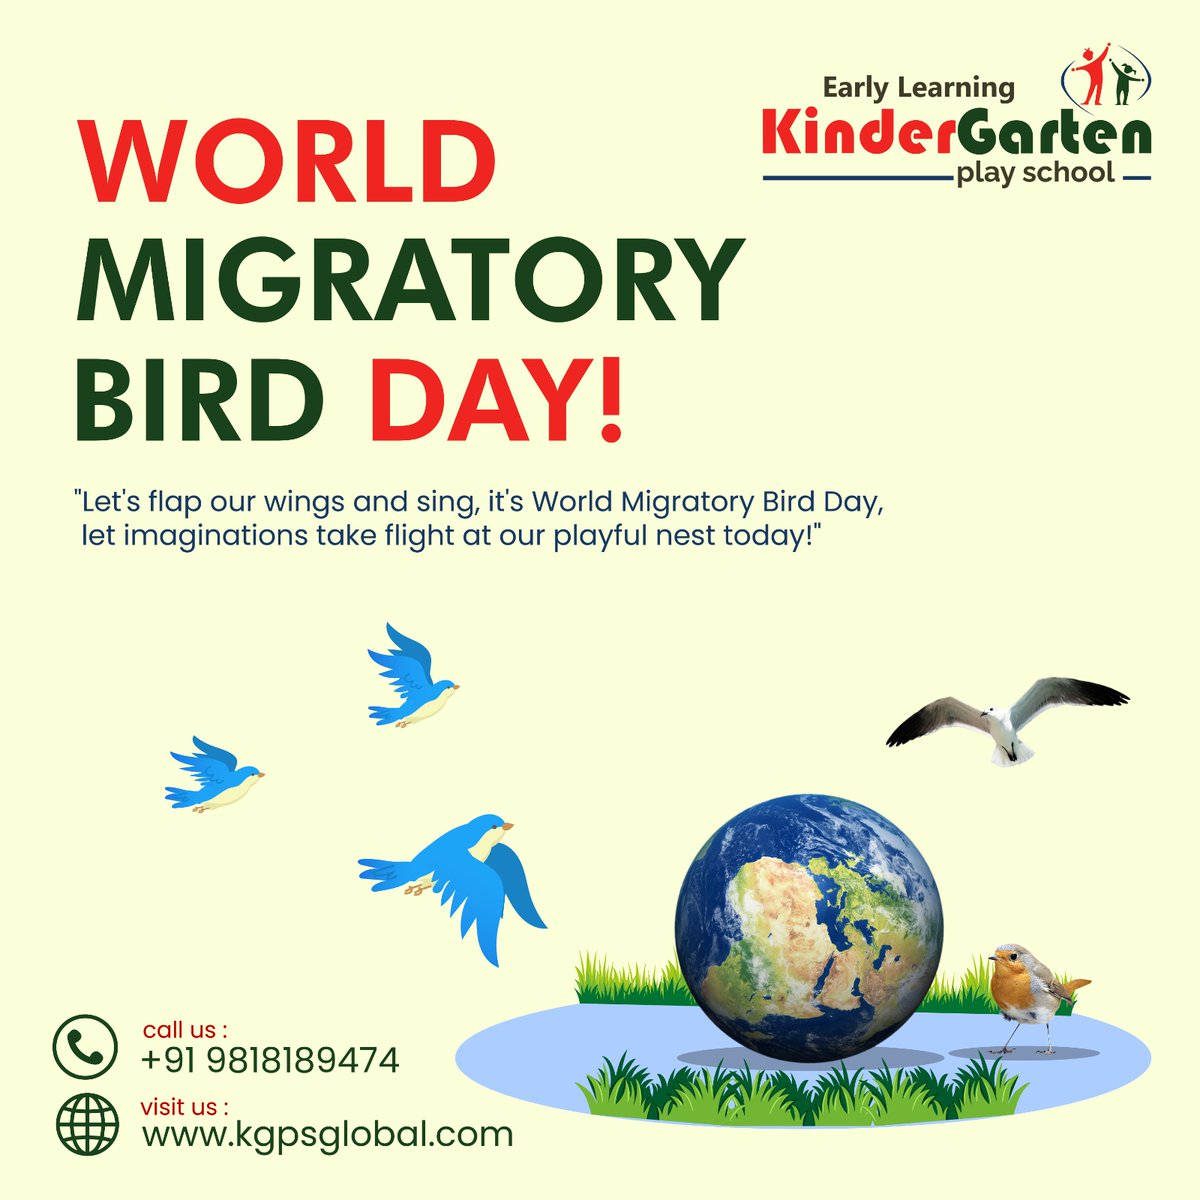 Let's flap our wings and sing, it's World Migratory Bird Day, let imaginations take flight at our playful nest today!
#kgpsglobal #kindergarten #kindergartenlife #kindergartenready #kidsplay #StudySmarter #migratory #MigratoryBirdDay #migratoryspecies #bird #migratoryshorebirds